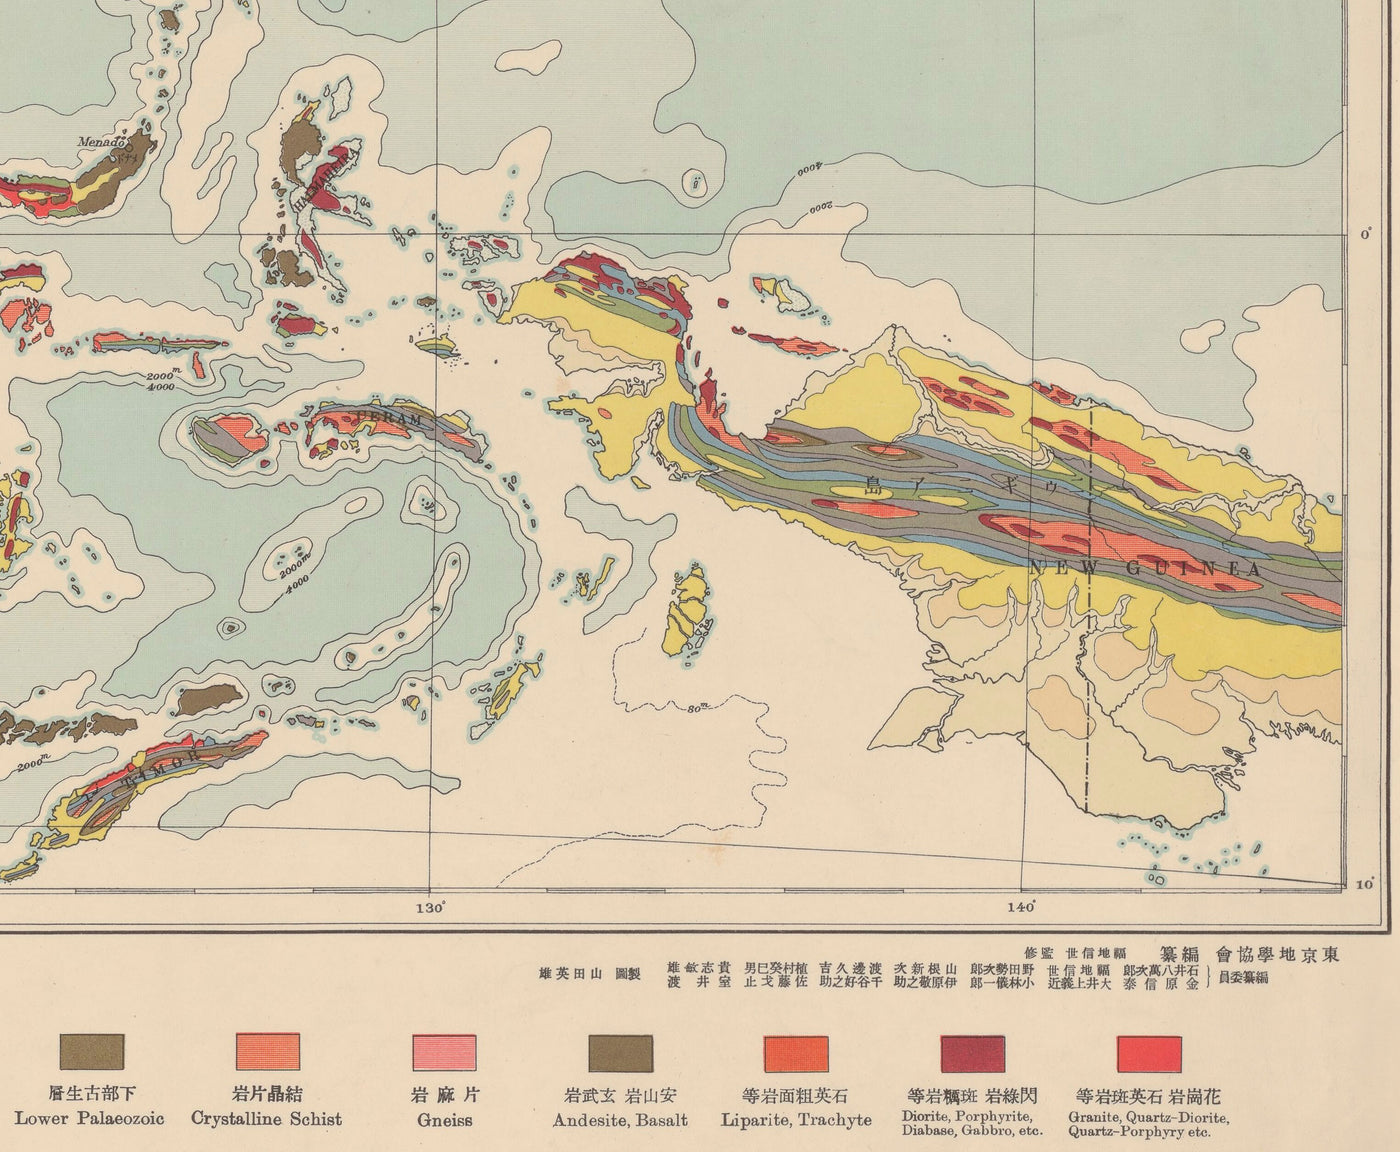 Old Geological Map of Eastern Asia and Malay Archipelago in 1932 by Tokyo Geology Society - Japan, China, Indonesia, Vietnam, Taiwan